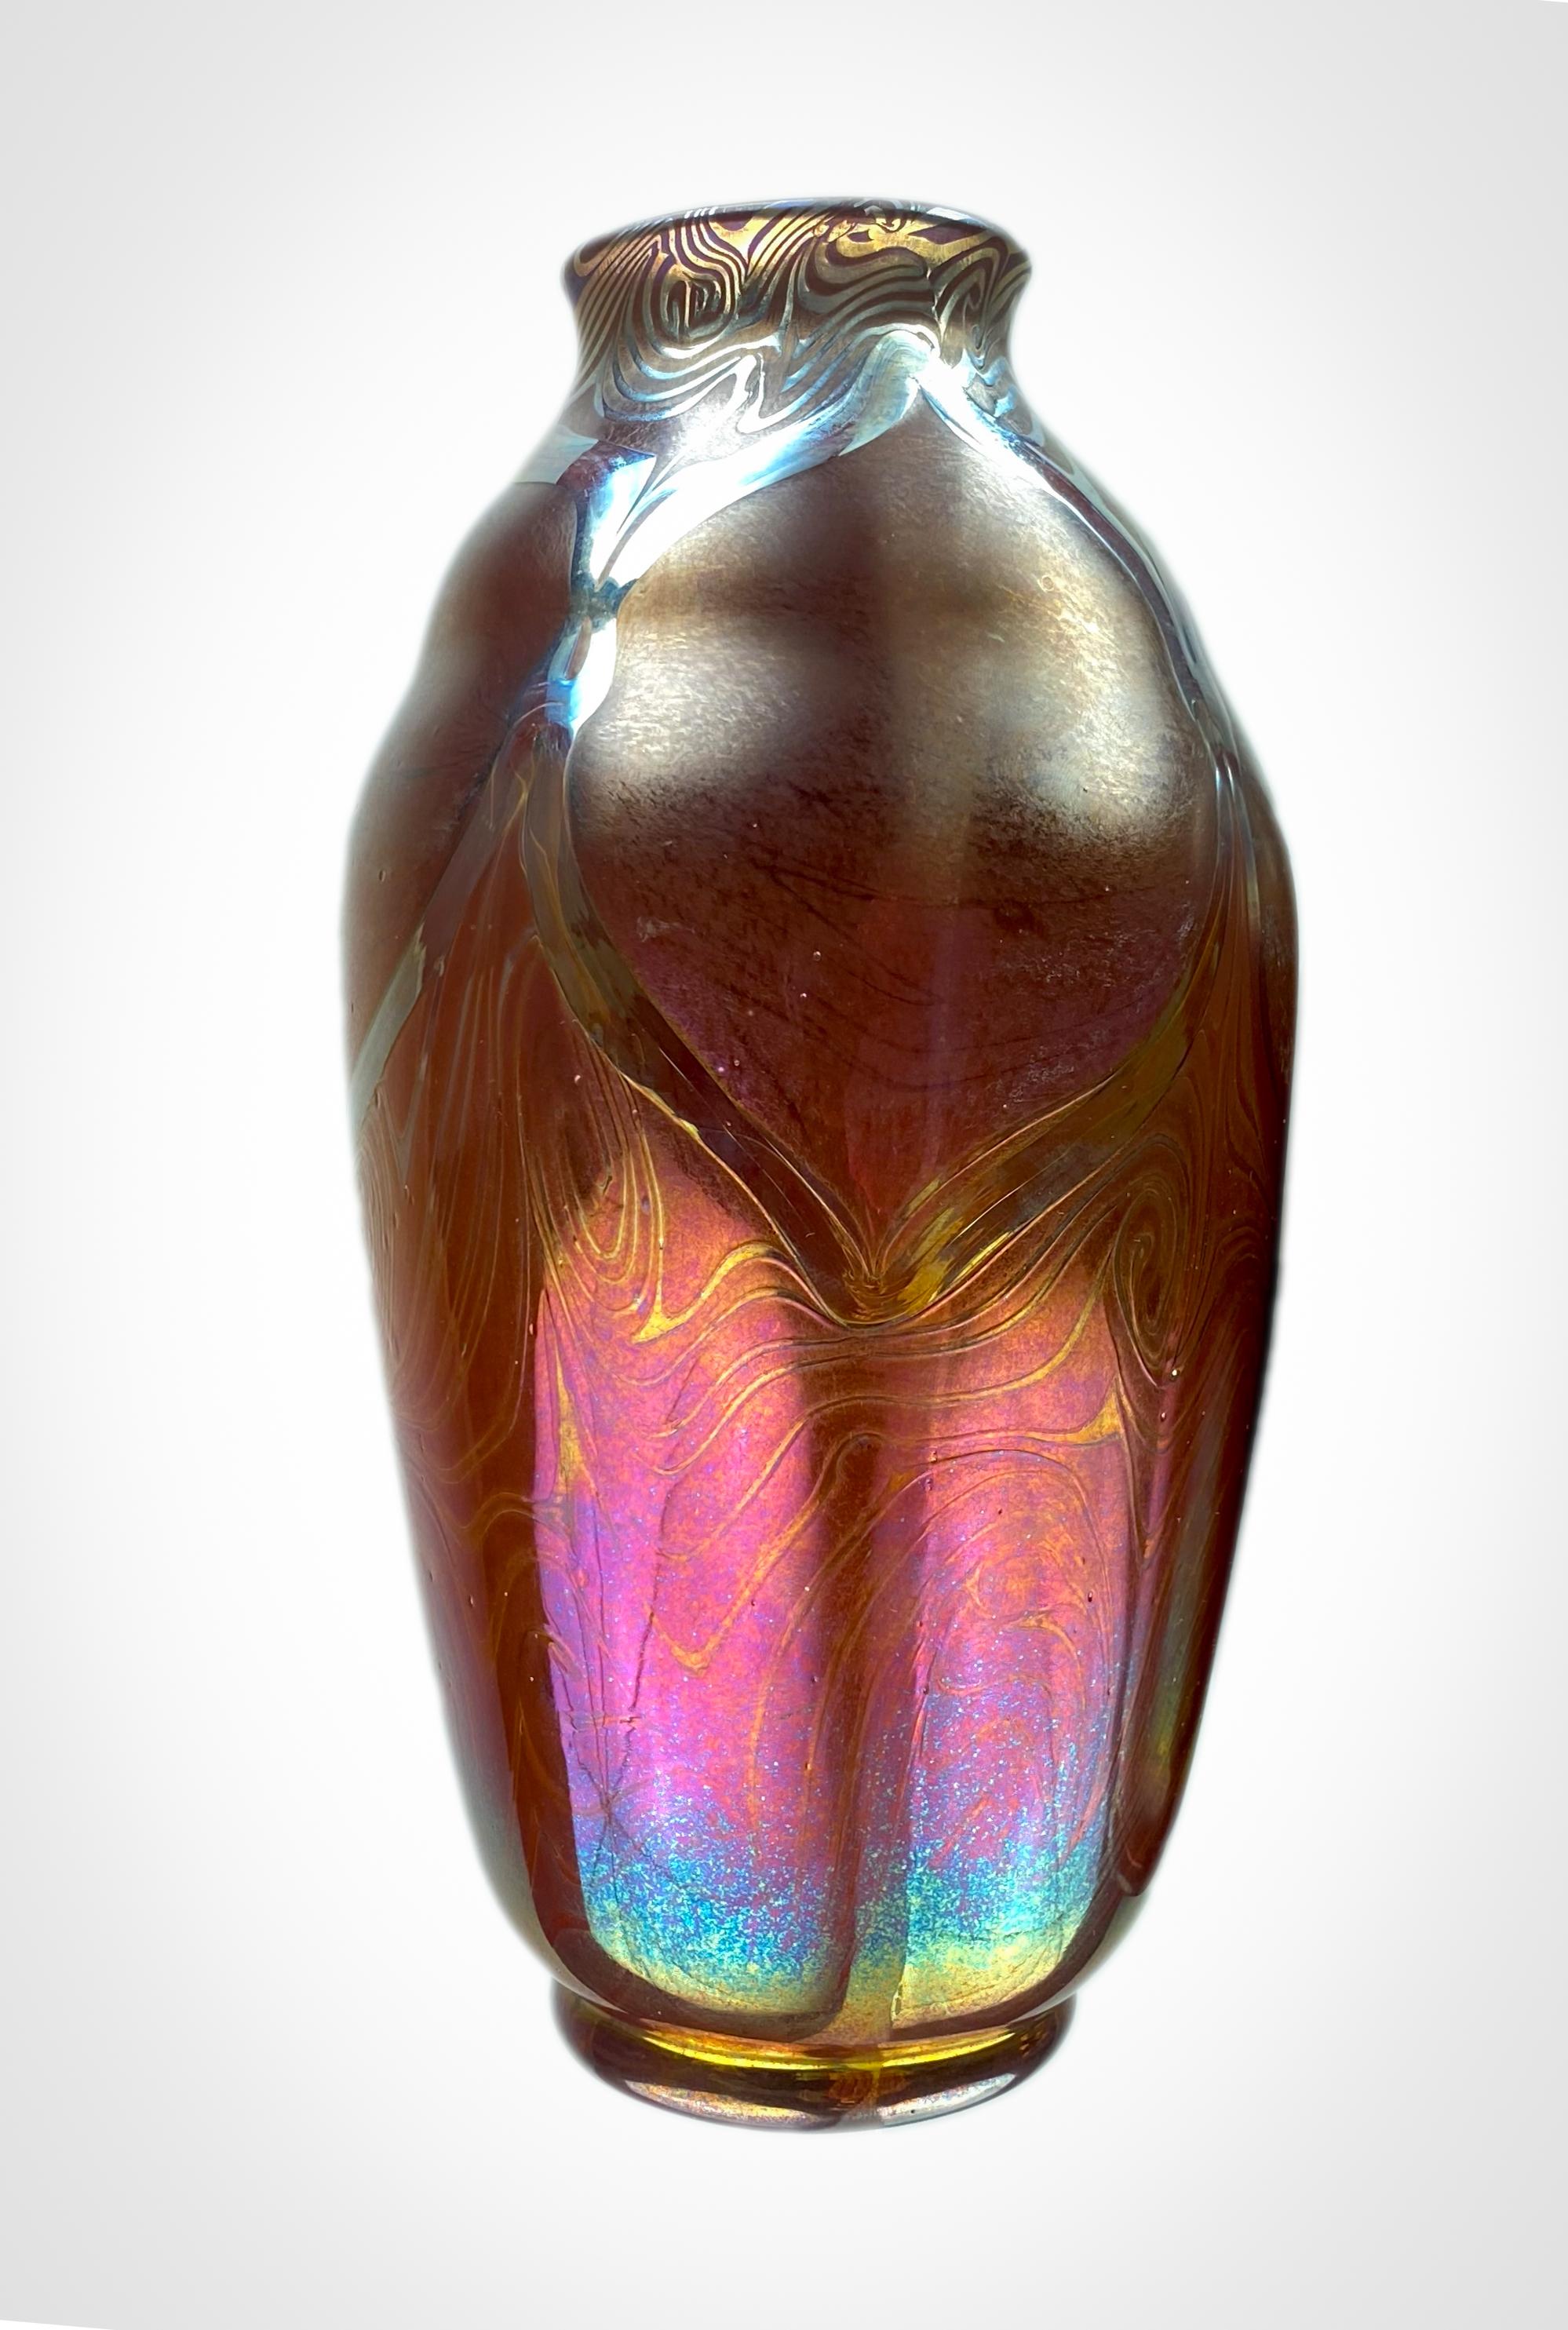 American Tiffany Studios Favrile Iridescent and Reactive Decorated Art Glass Vase